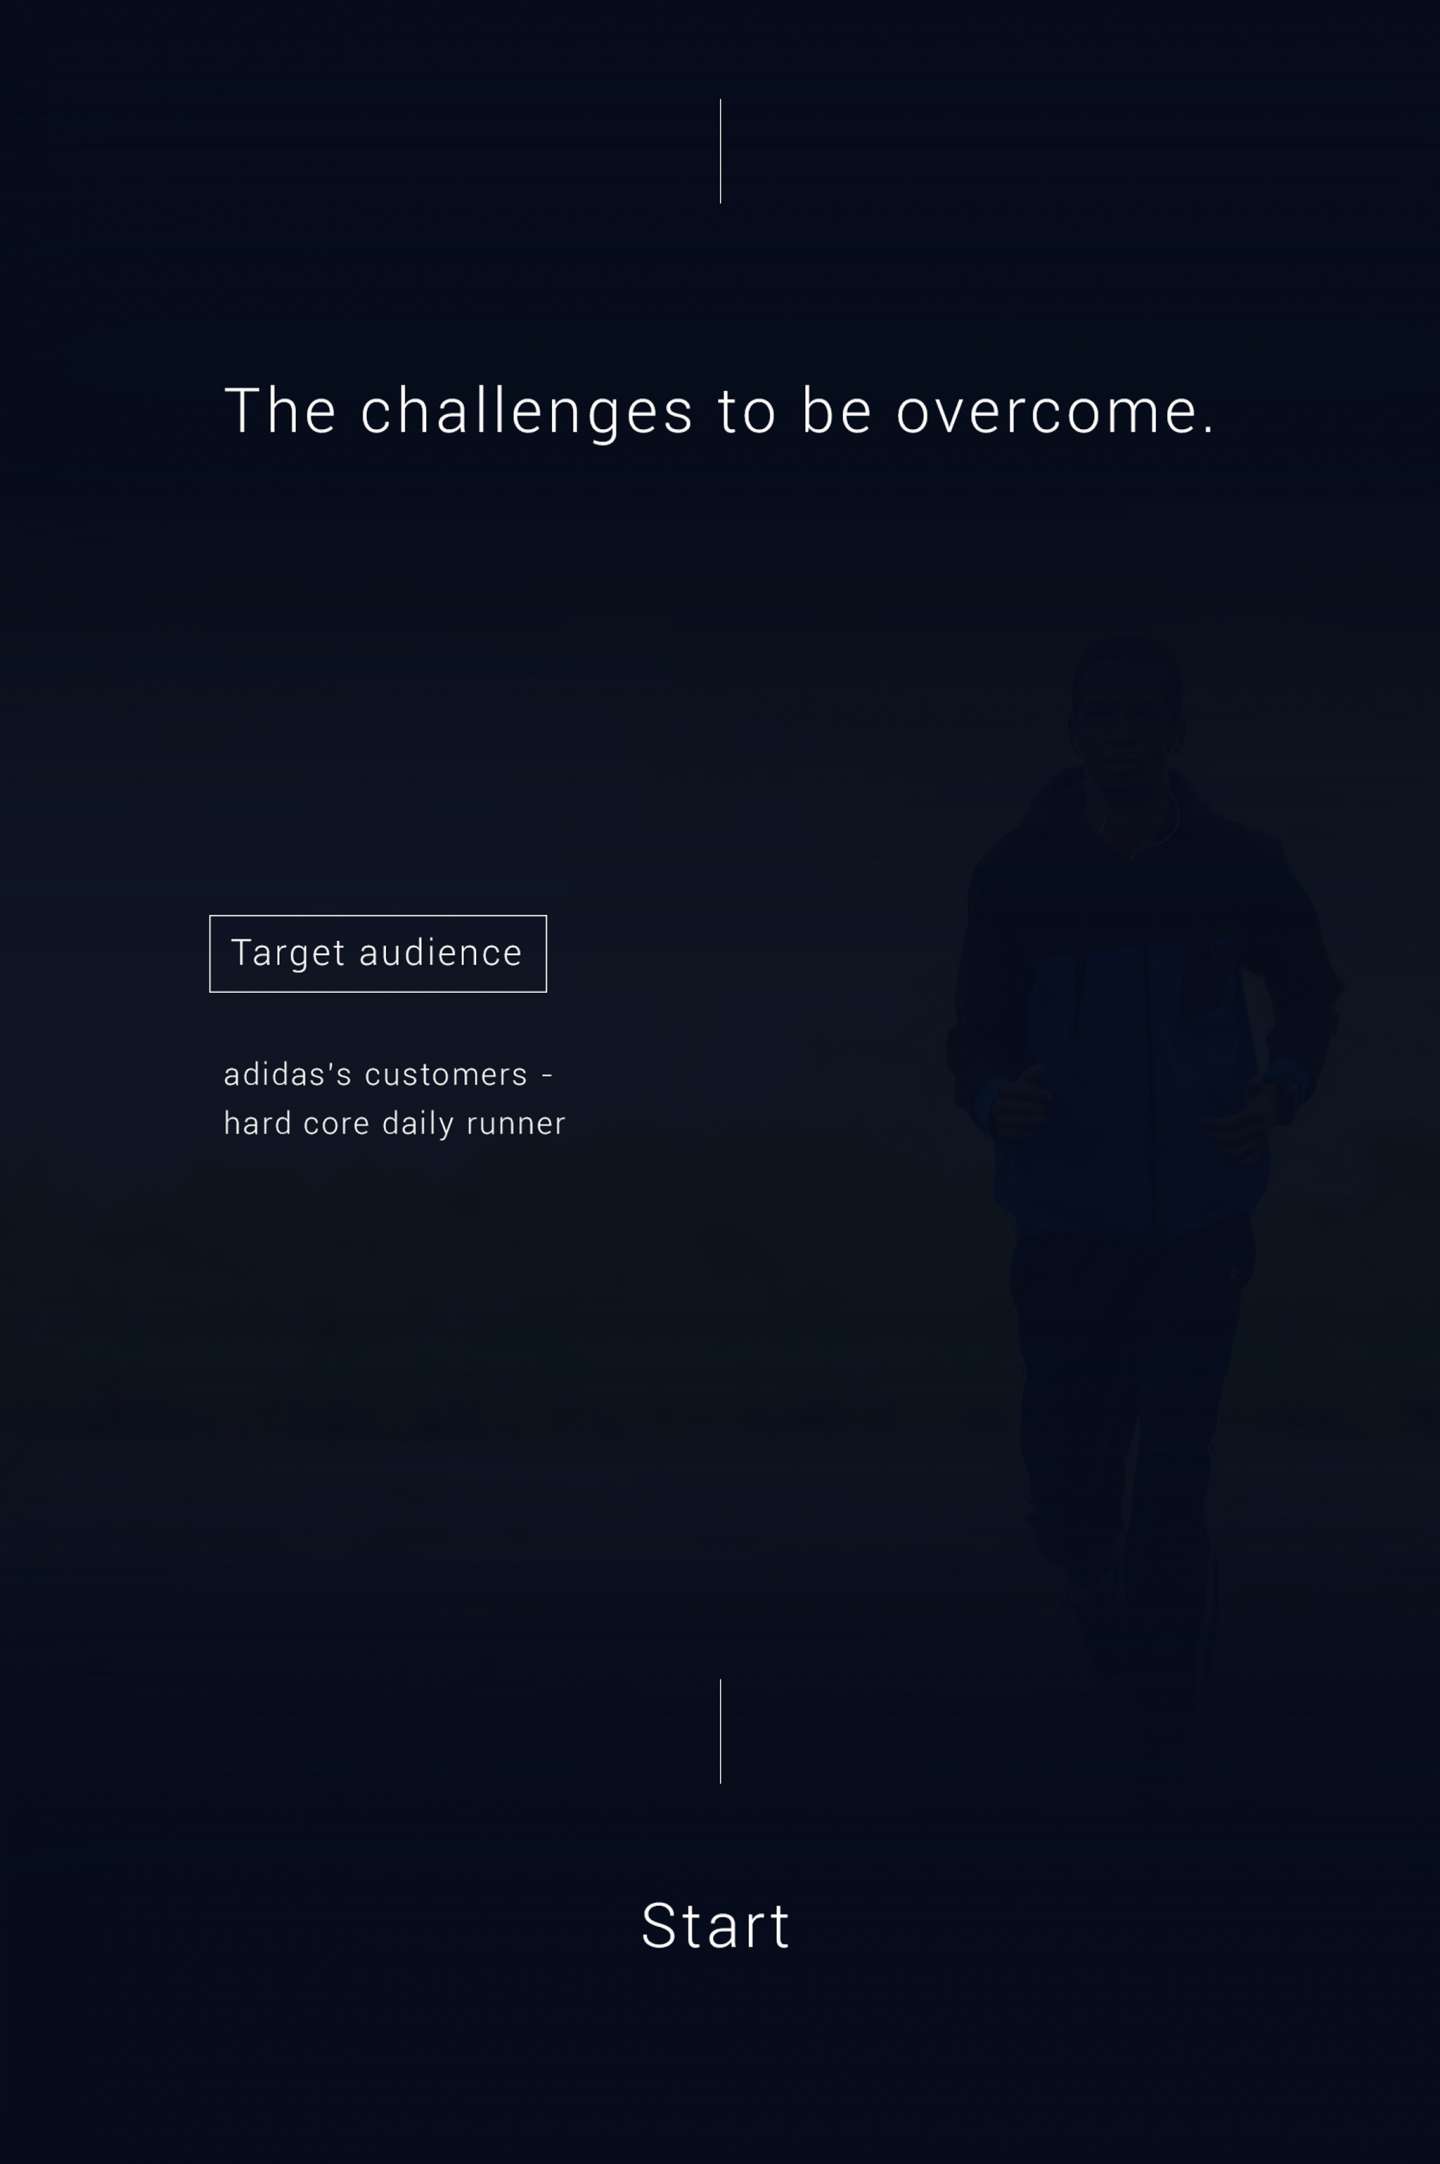 Adidas- "The challenges to be overcome."